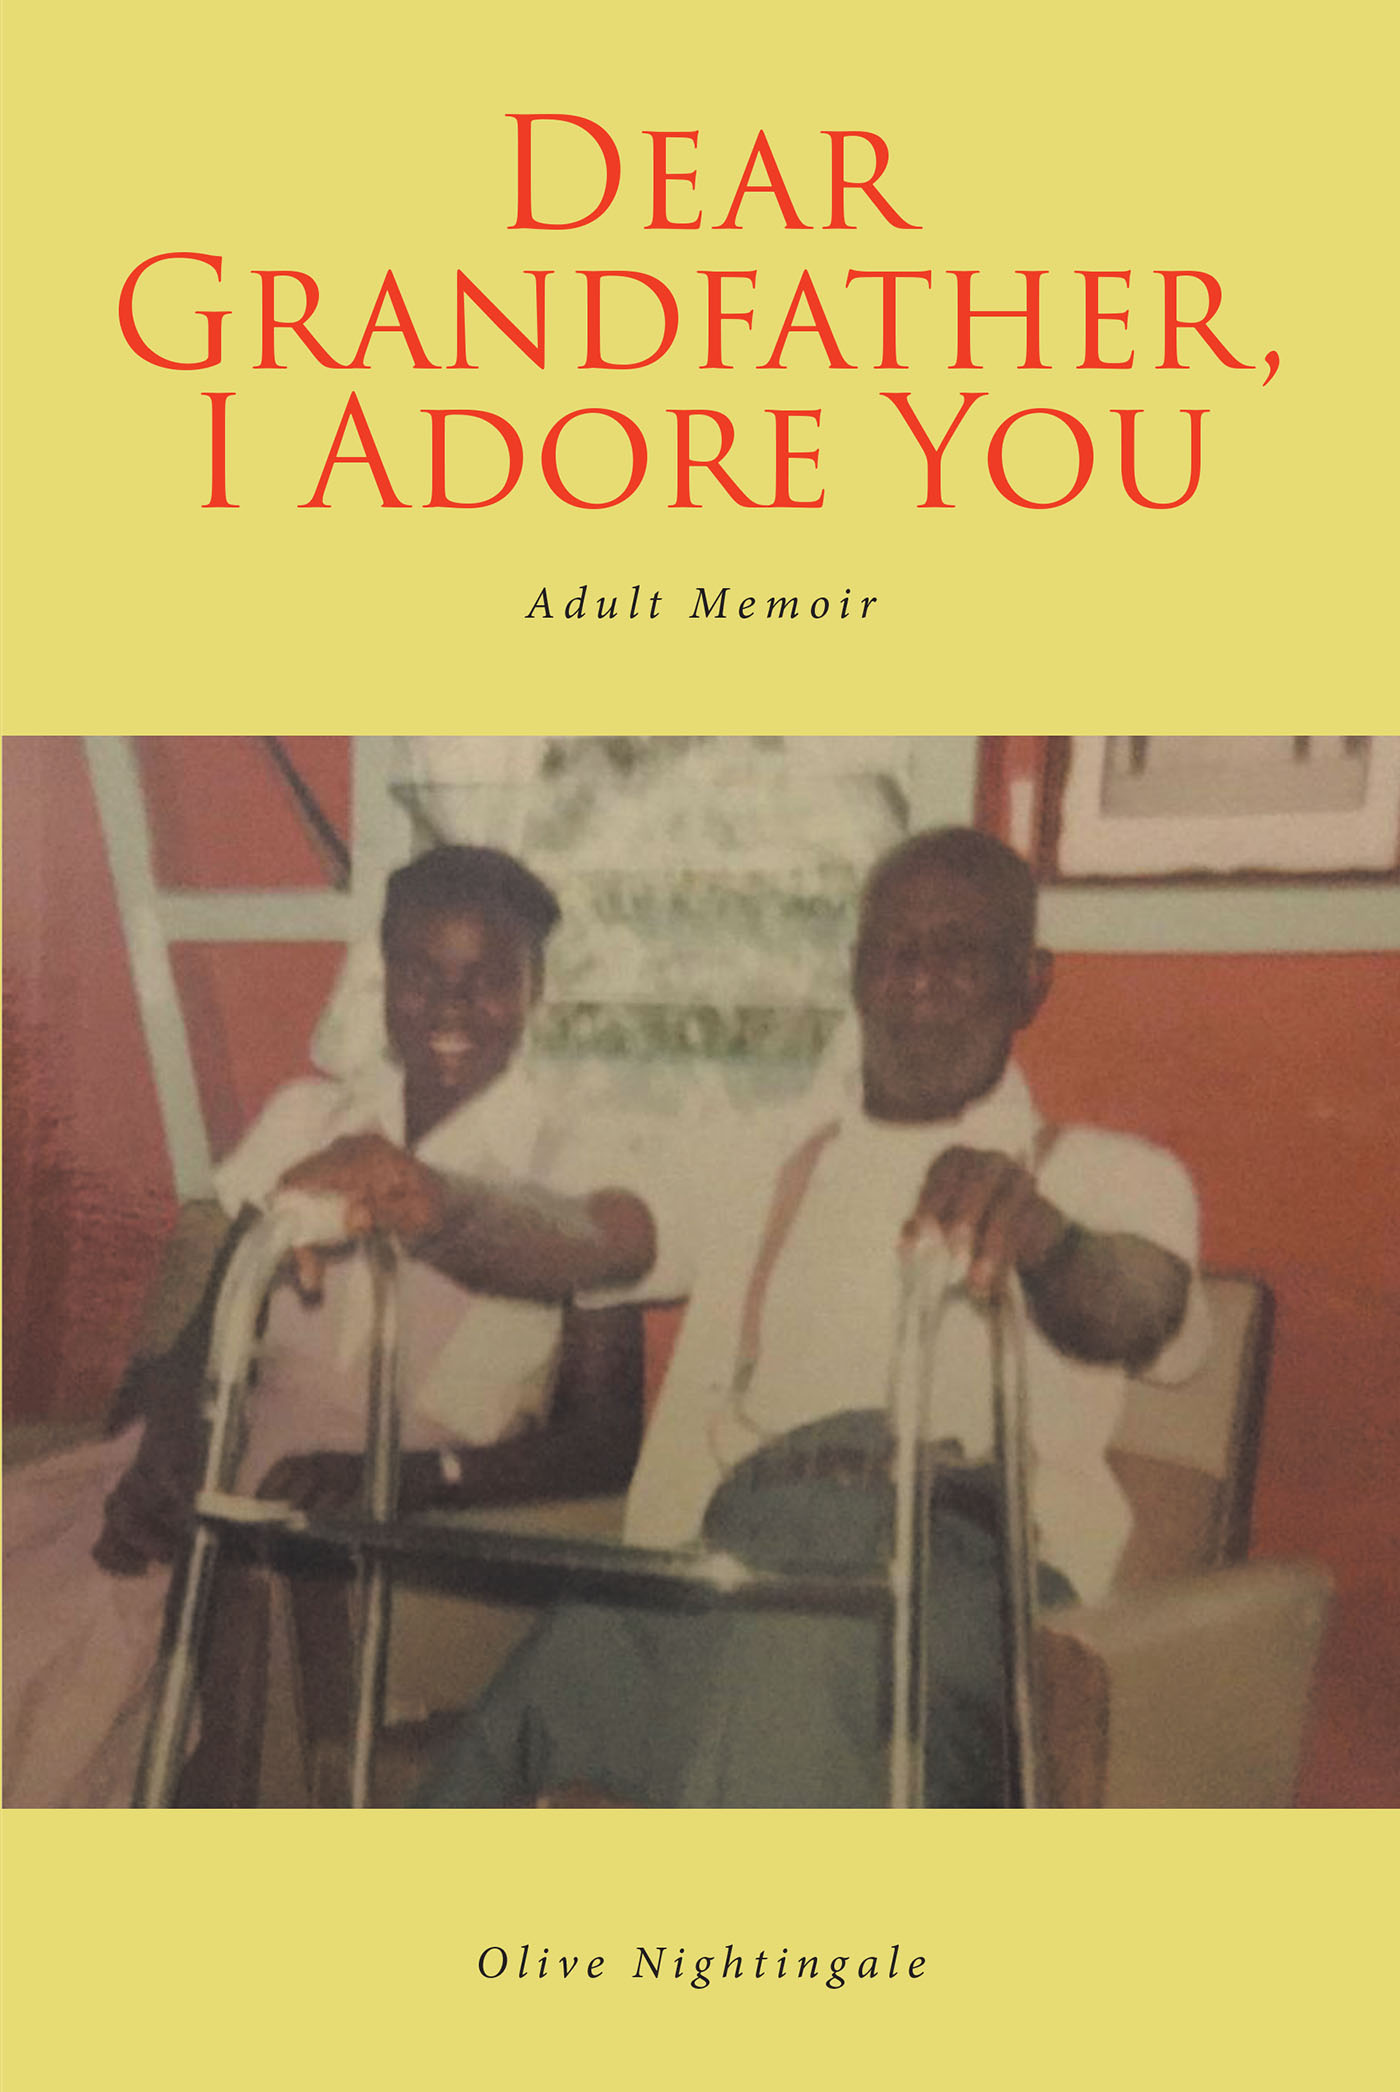 Olive Nightingale’s Newly Released "Dear Grandfather, I Adore You" is a Celebration of the Gifts of Love, Compassion, and Security Bestowed on a Beloved Granddaughter